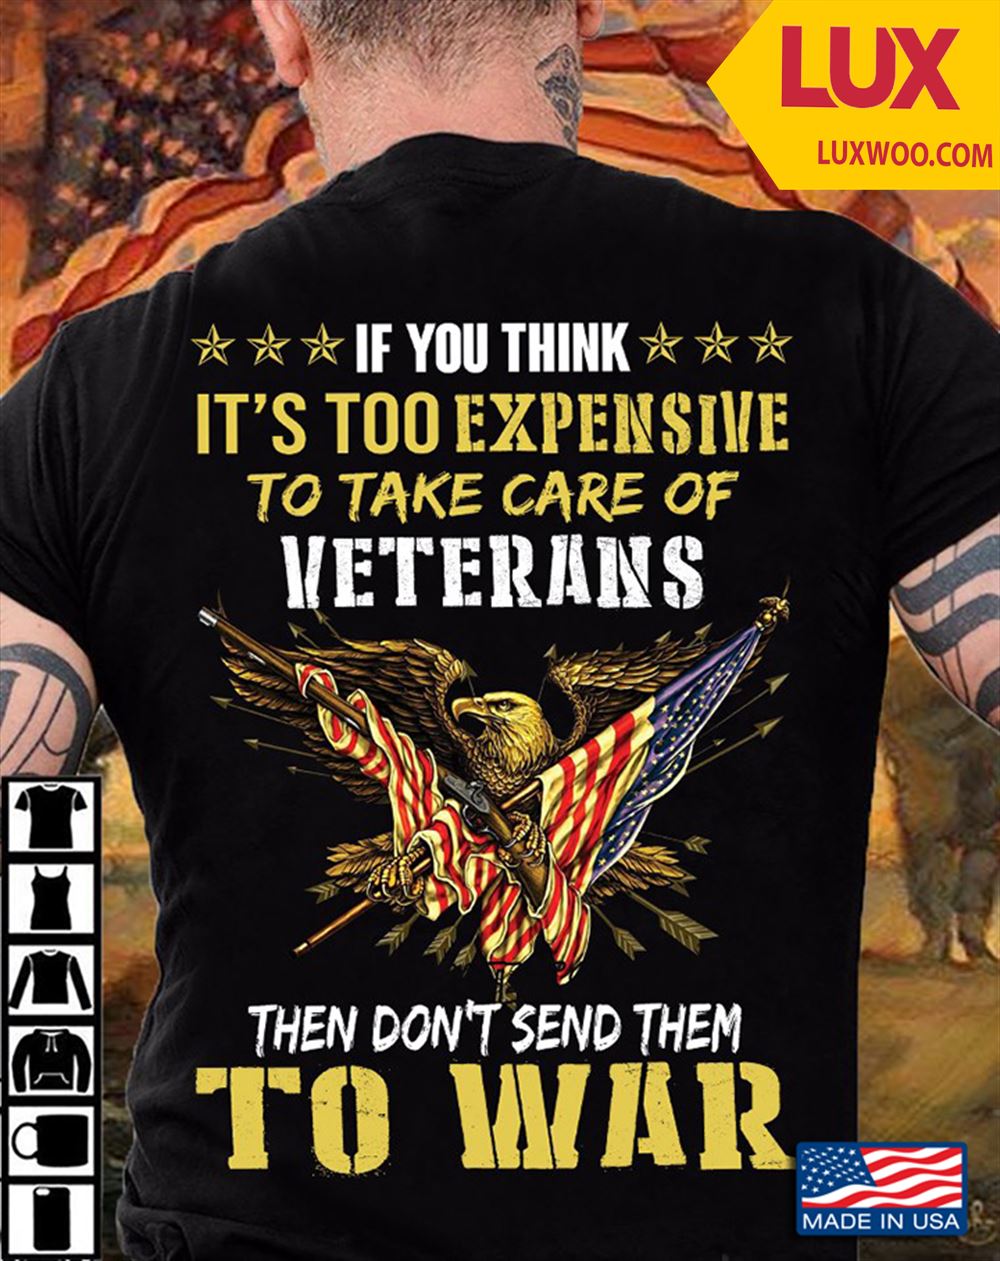 If You Think Its Too Expensive To Take Care Of Veterans Then Dont Send Them To War Tshirt Size Up To 5xl